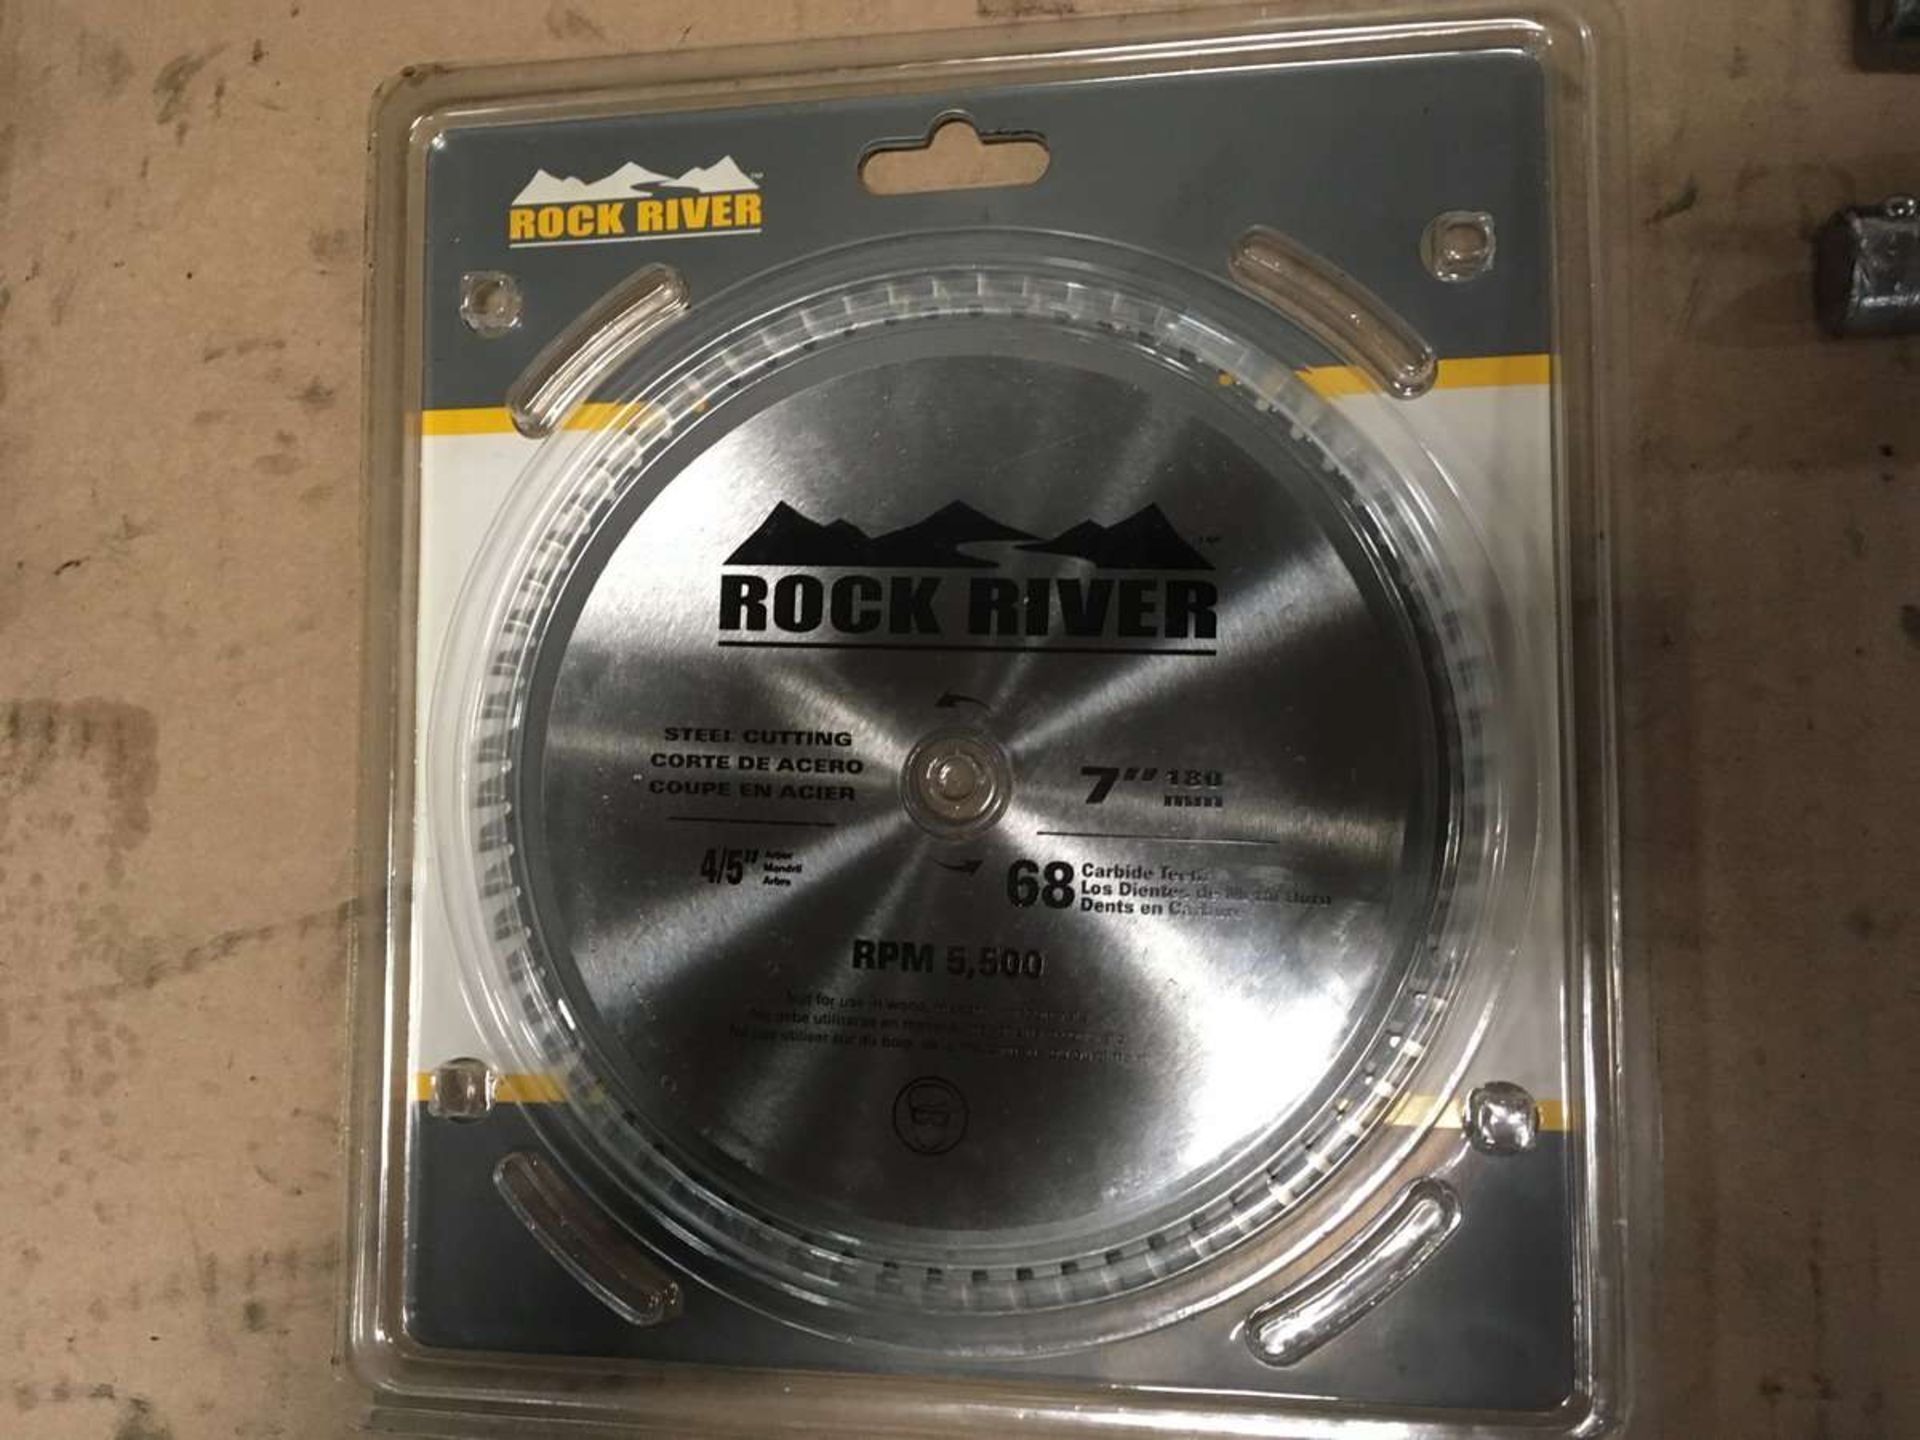 Rock River 7inch, (180mm) 5,500 Rpm, Steel Cutting Saw Blades - Image 3 of 3